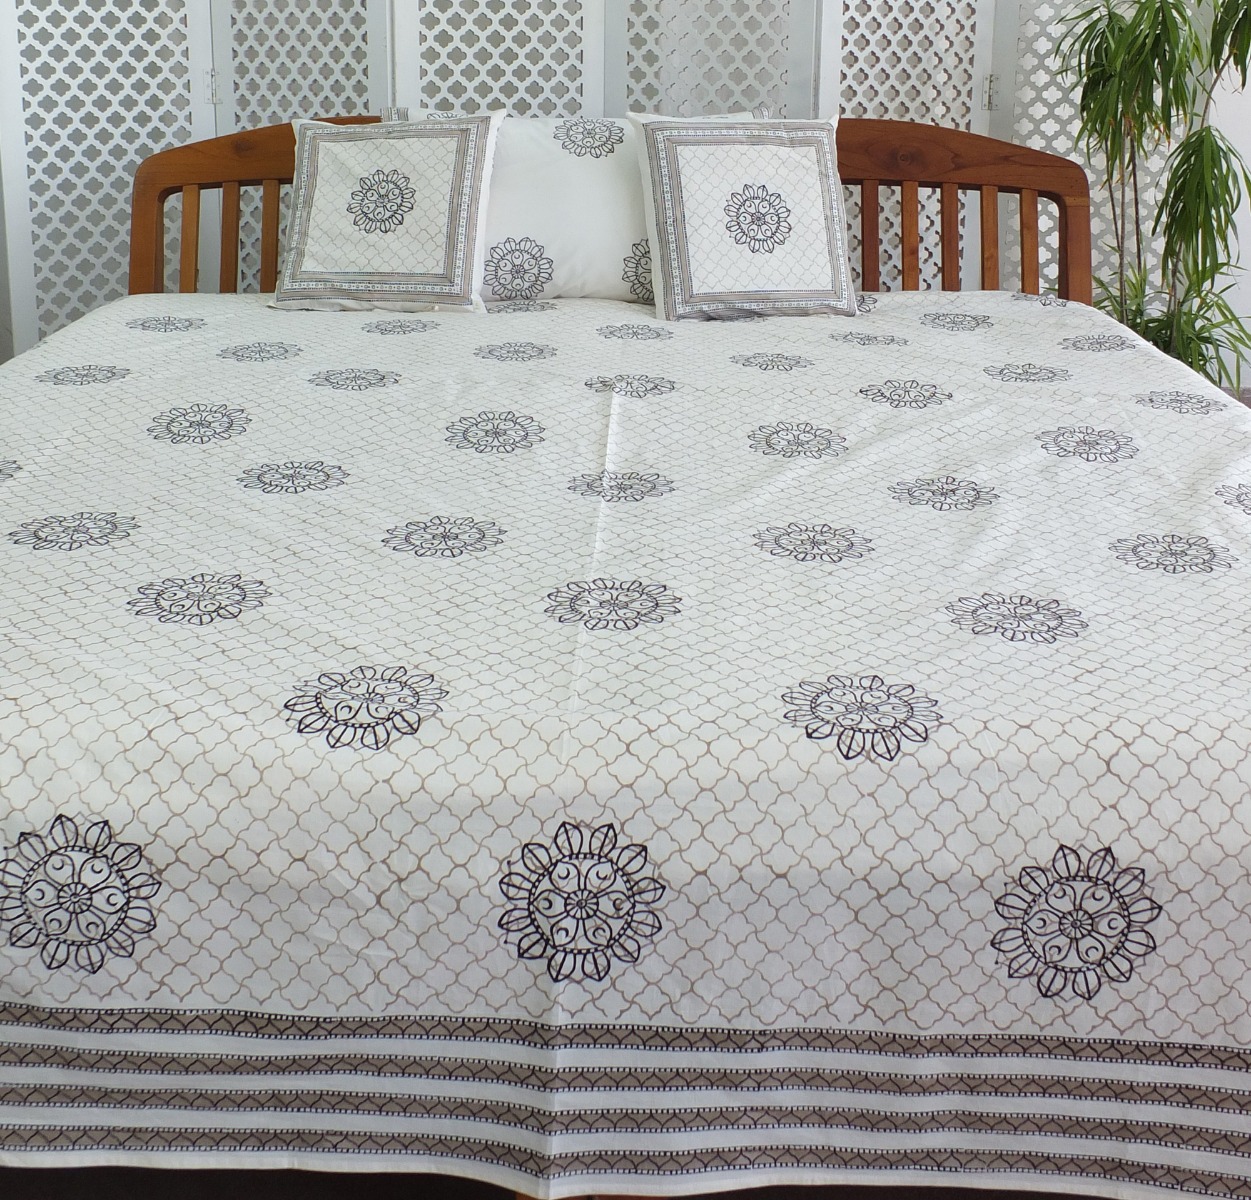 ORGANIC COTTON BED SPREAD KING